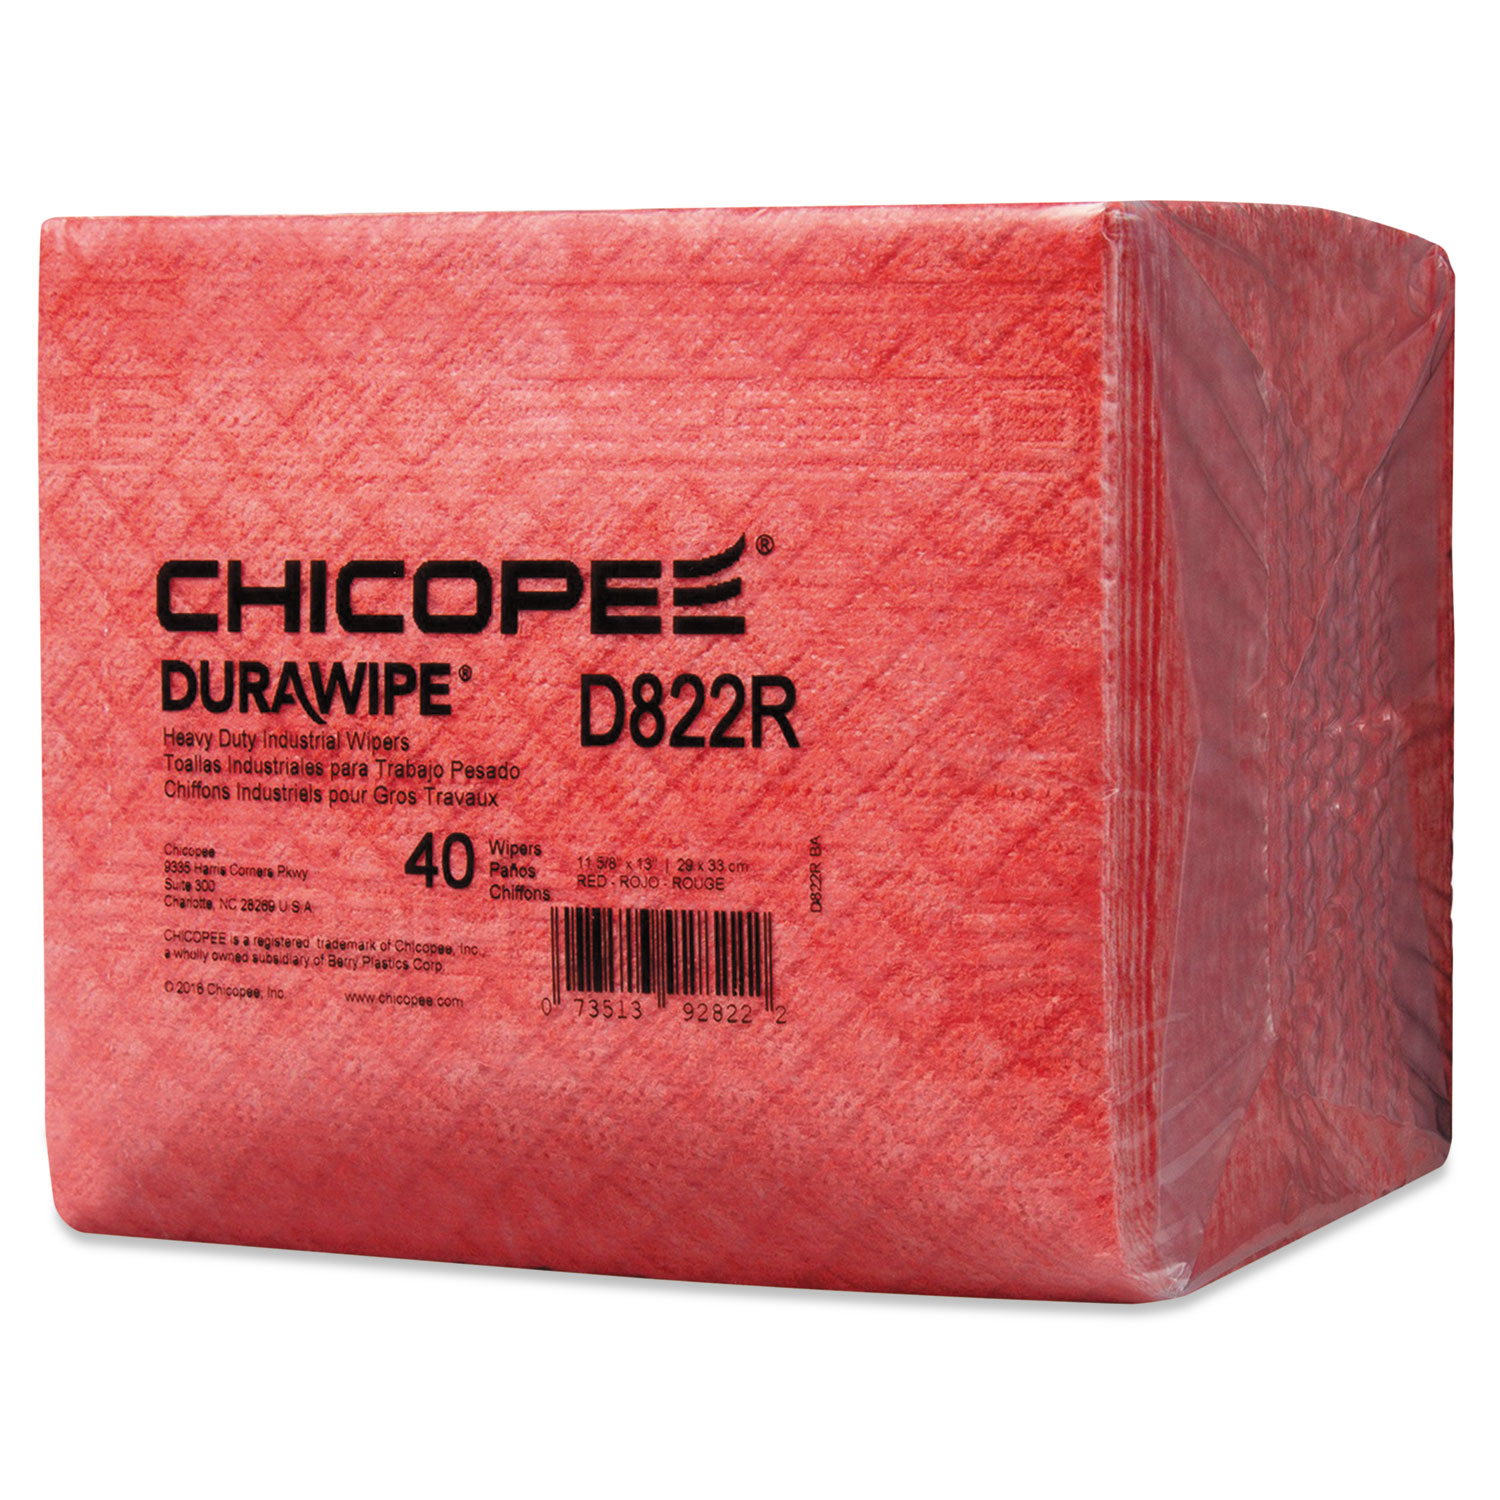  Chicopee D822R Durawipe Heavy-Duty Industrial Wipers, 11.6 x 13, Red, 1/4 Fold,40/Pack,5Pk/CT (CHID822R) 